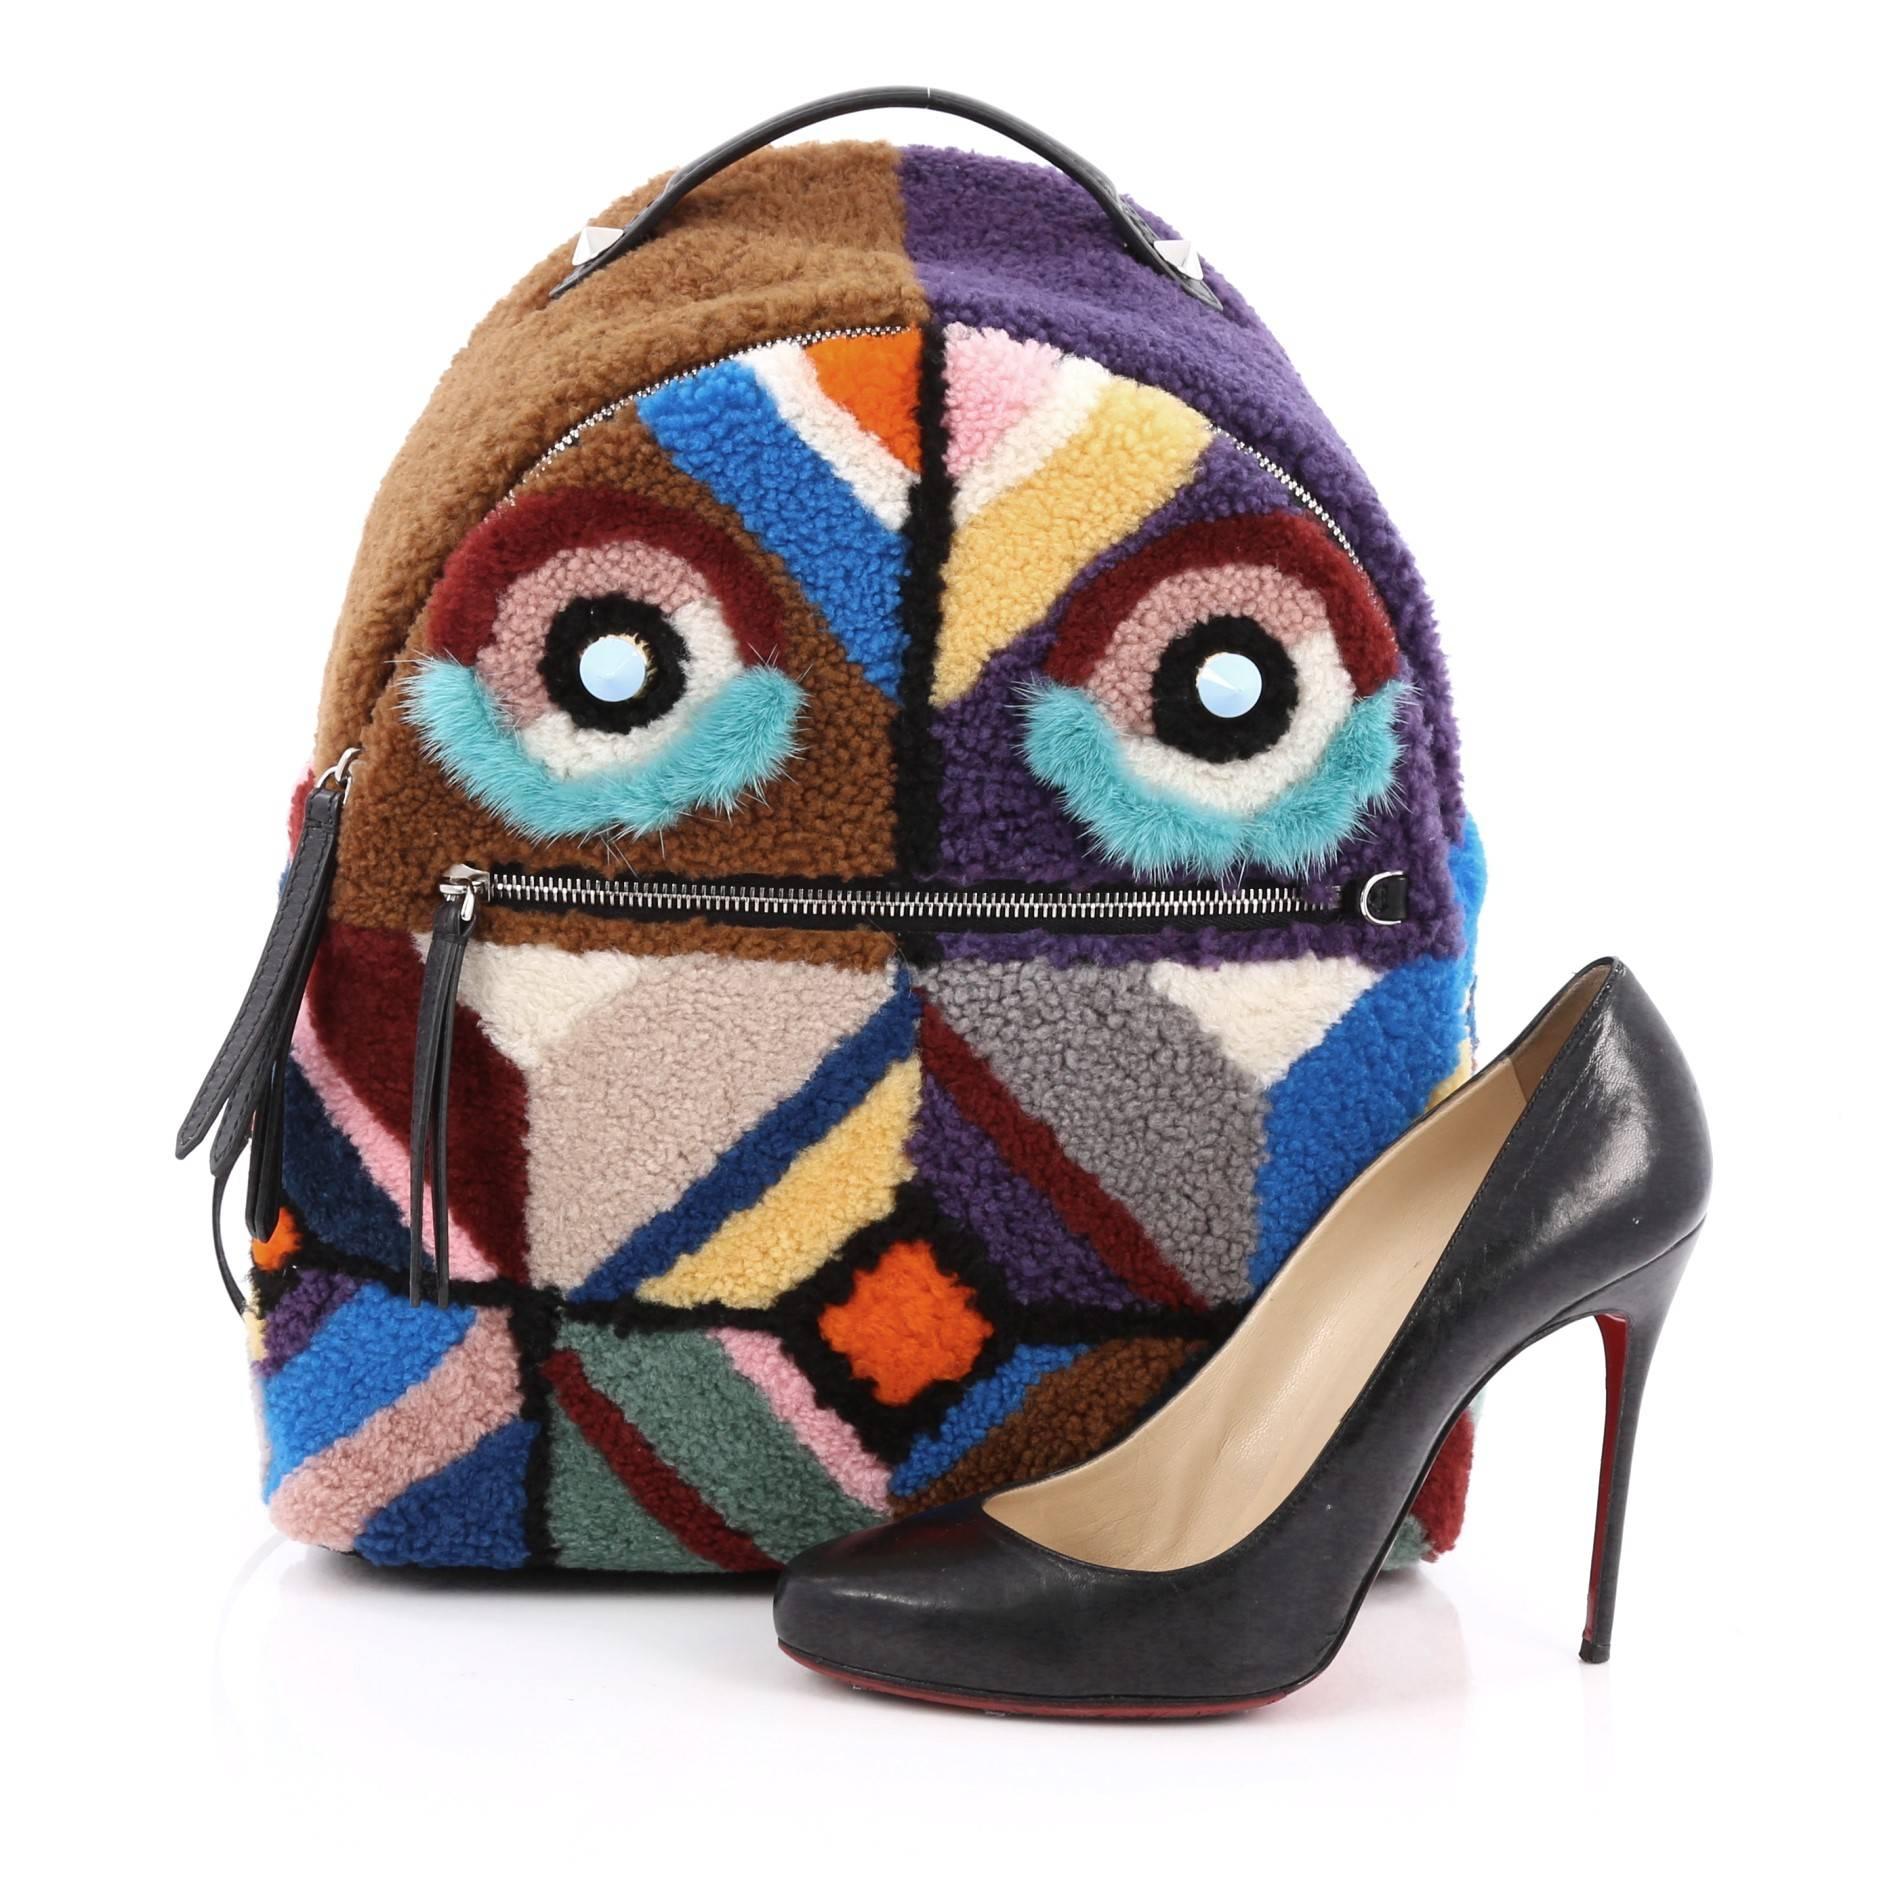 This authentic Fendi Bugs Backpack Multicolor Shearling with Fur is an eye catching, luxurious, playful style made for on-the-go fashionistas. Crafted from genuine multicolored dyed mink fur and dyed lamb shearling fur, this unique bag features,